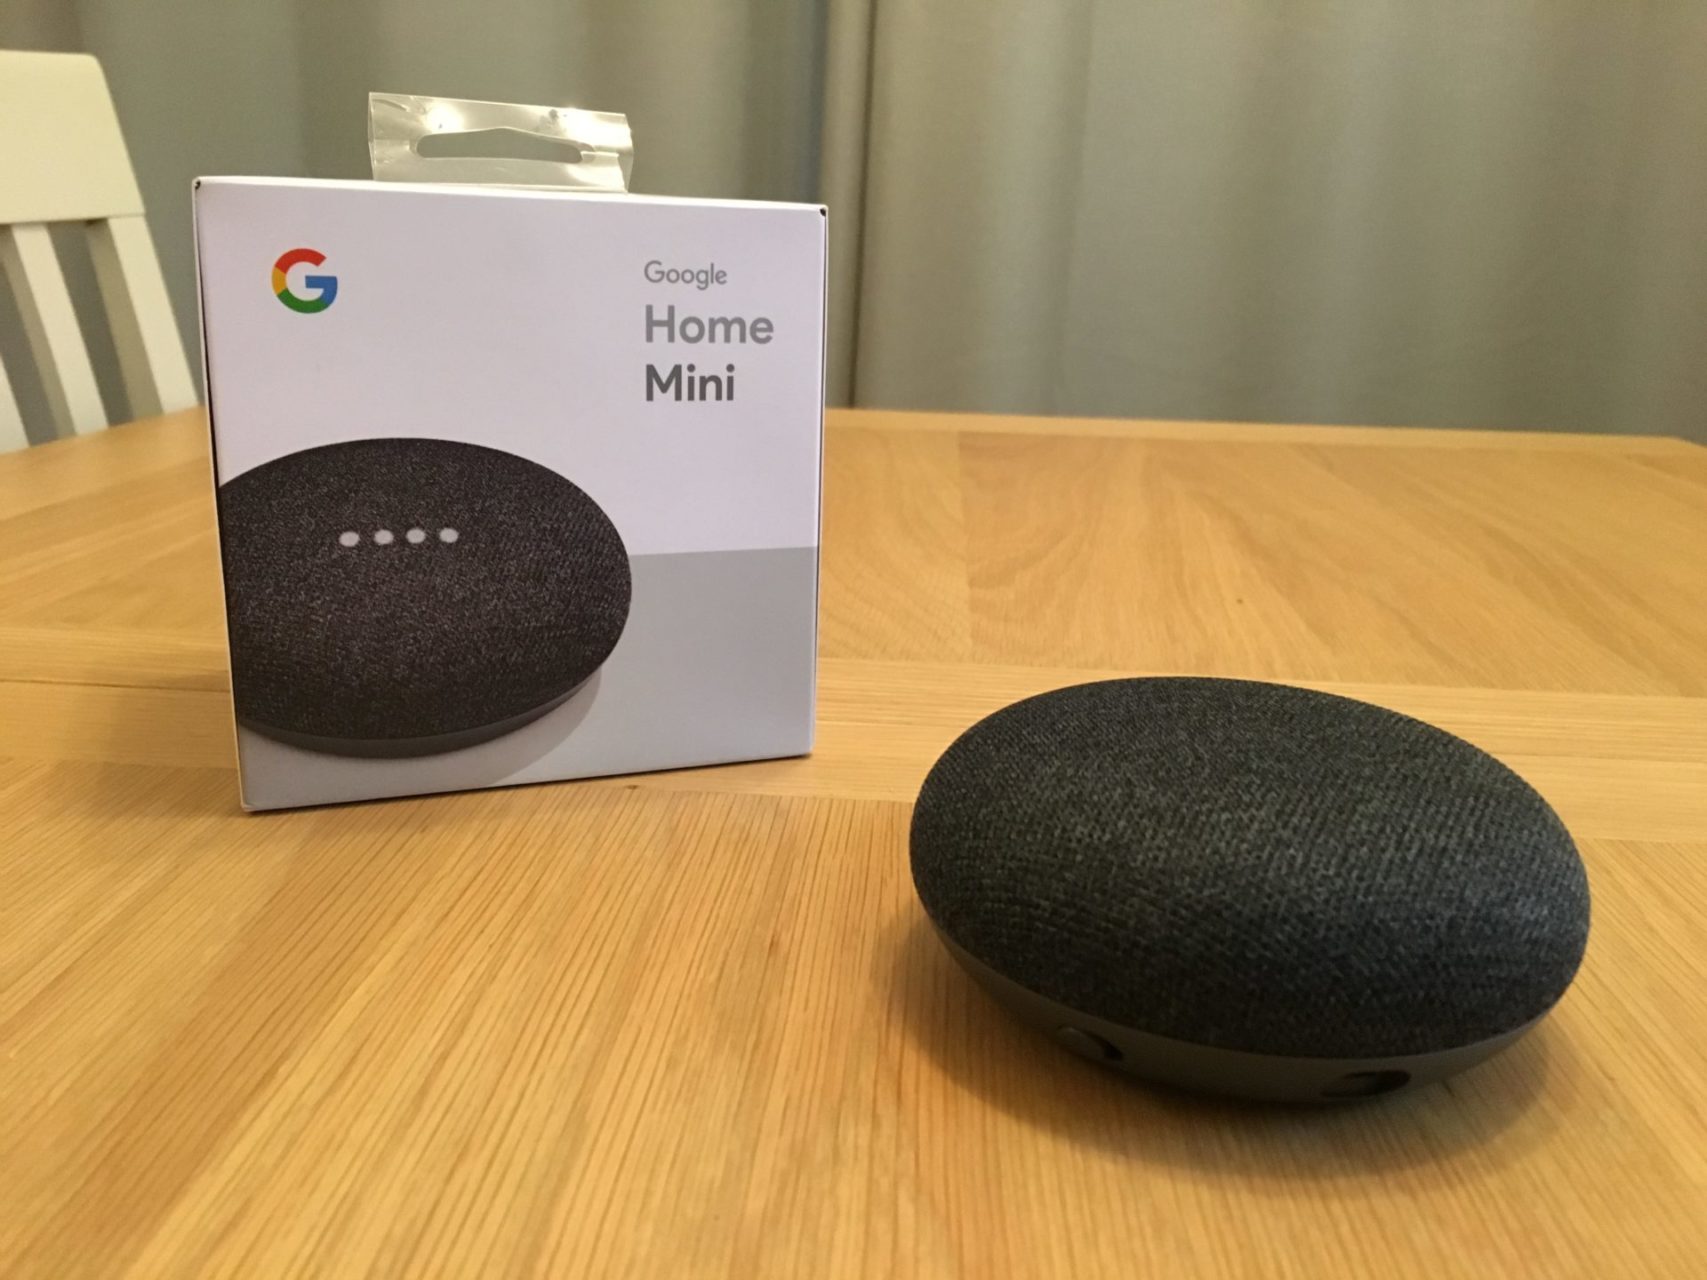 Google Home Mini: What Does It Do